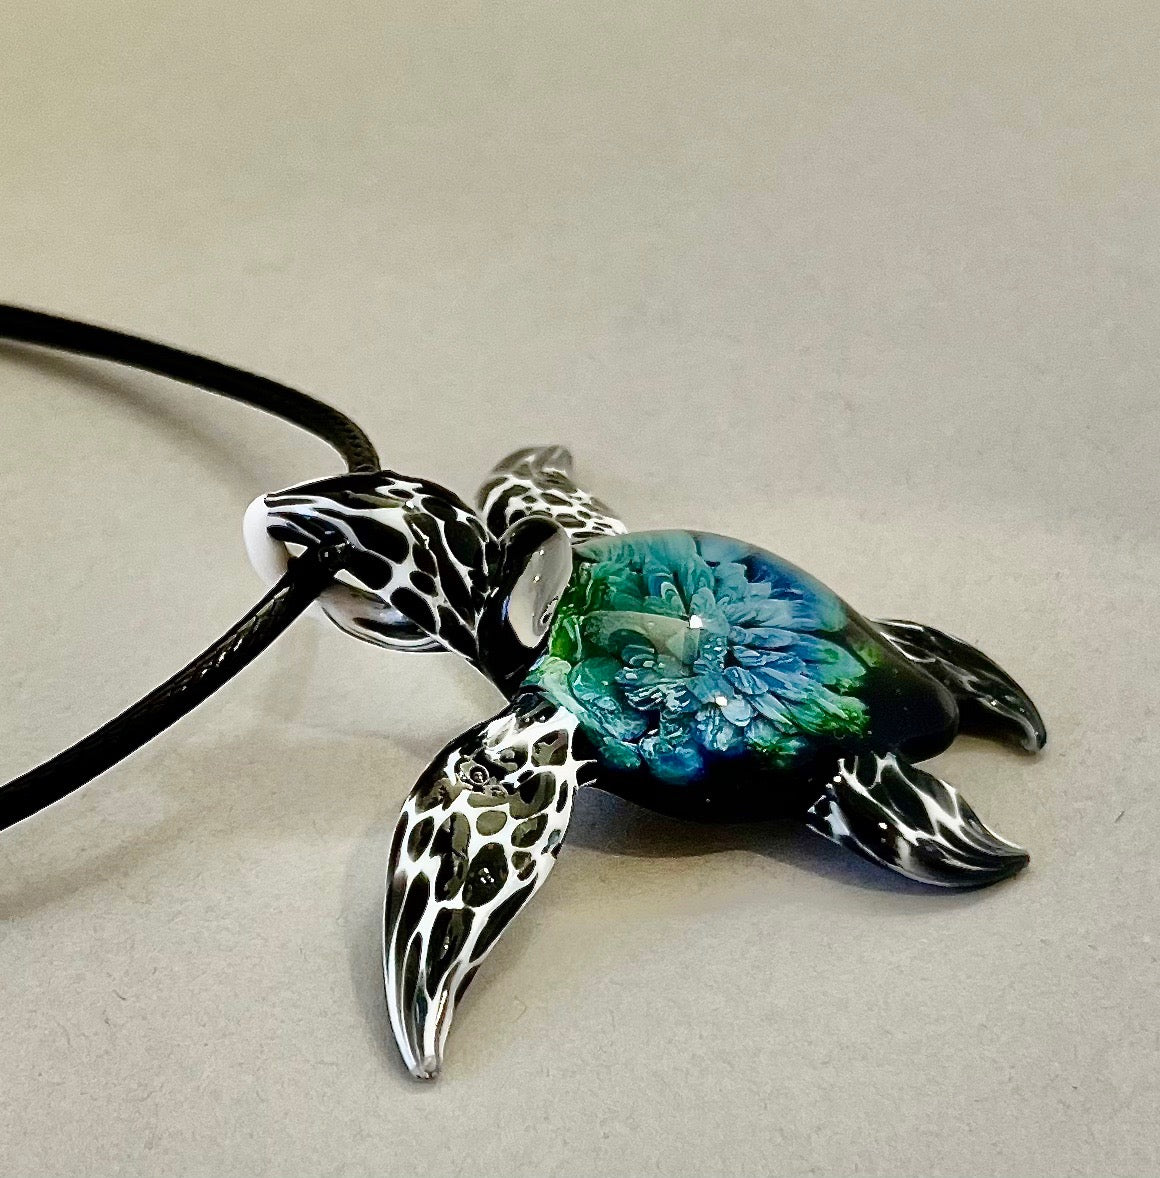 glass black and white spotted sea turtle pendant with iceberg style explosion in the shell at a 180 degree angle.